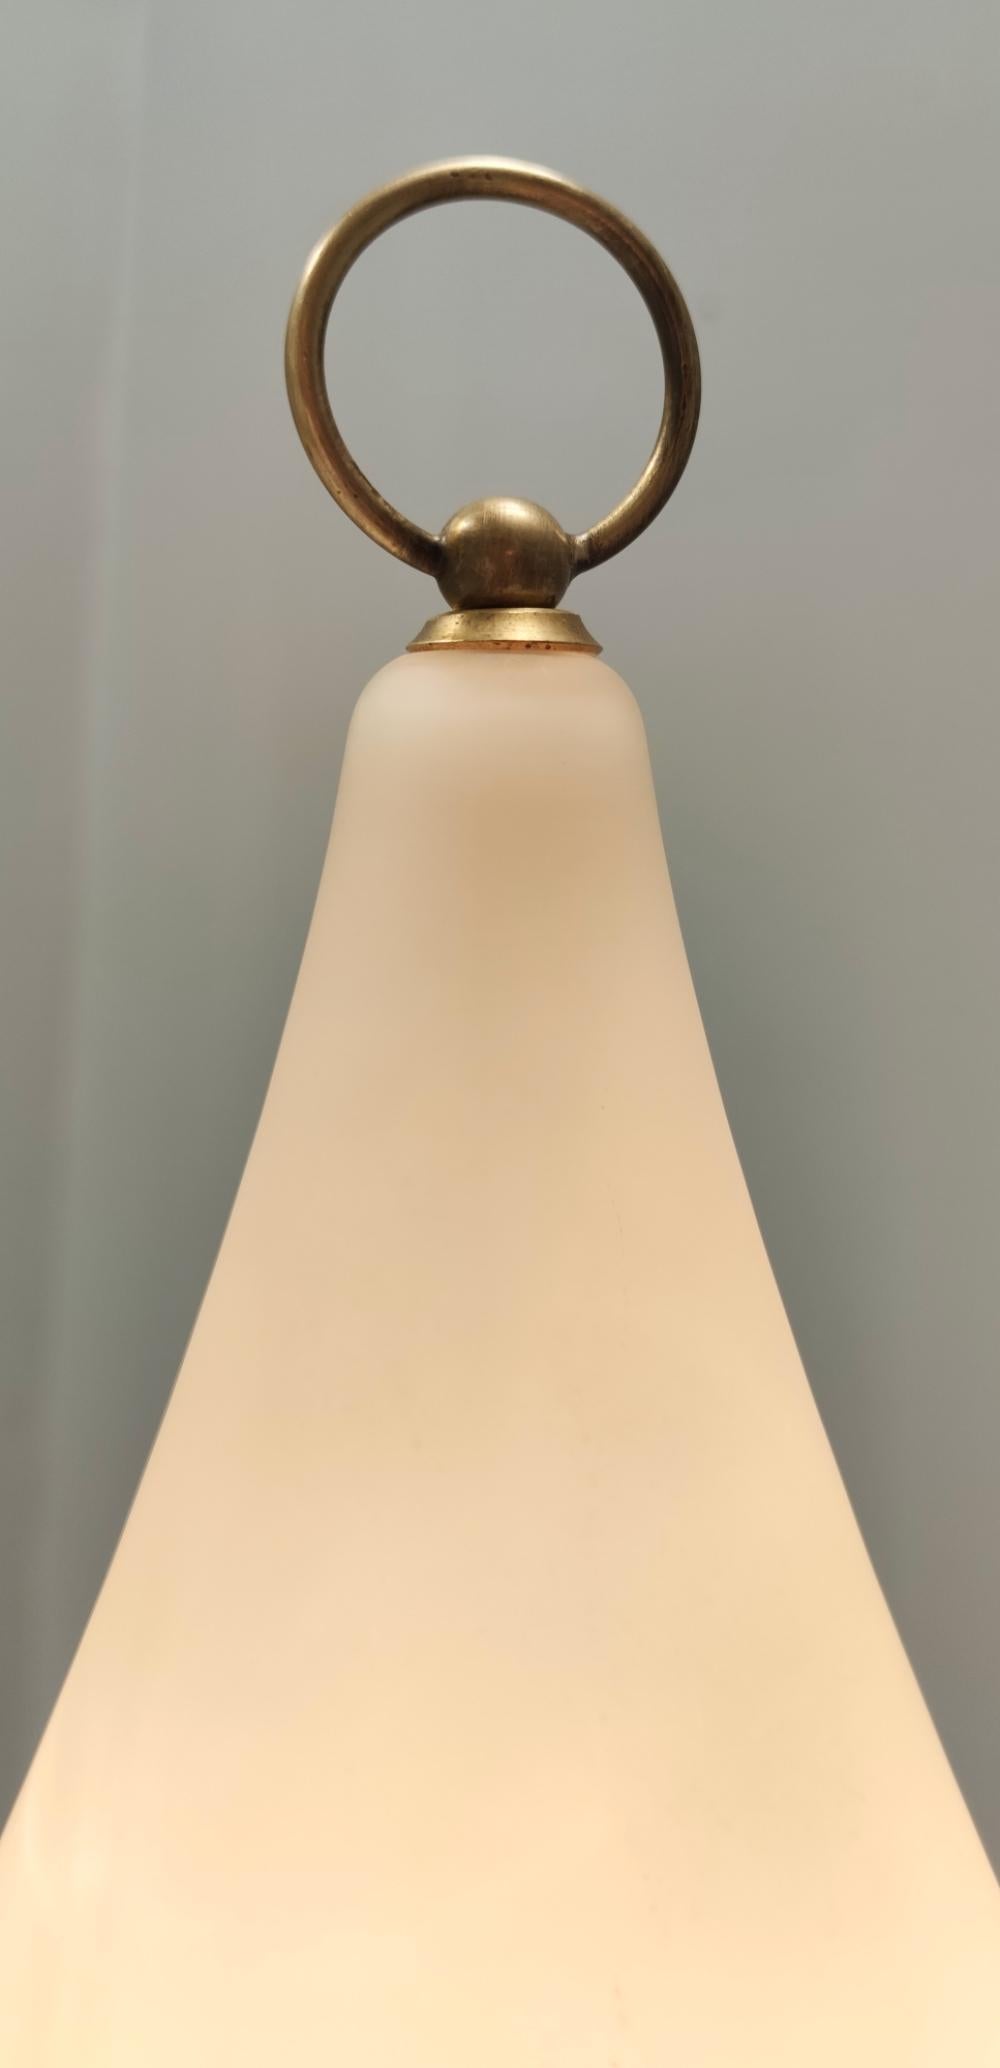 Mid-20th Century Elegant Vintage Opaline Glass and Iron Floor Lamp by Stilnovo, Italy For Sale